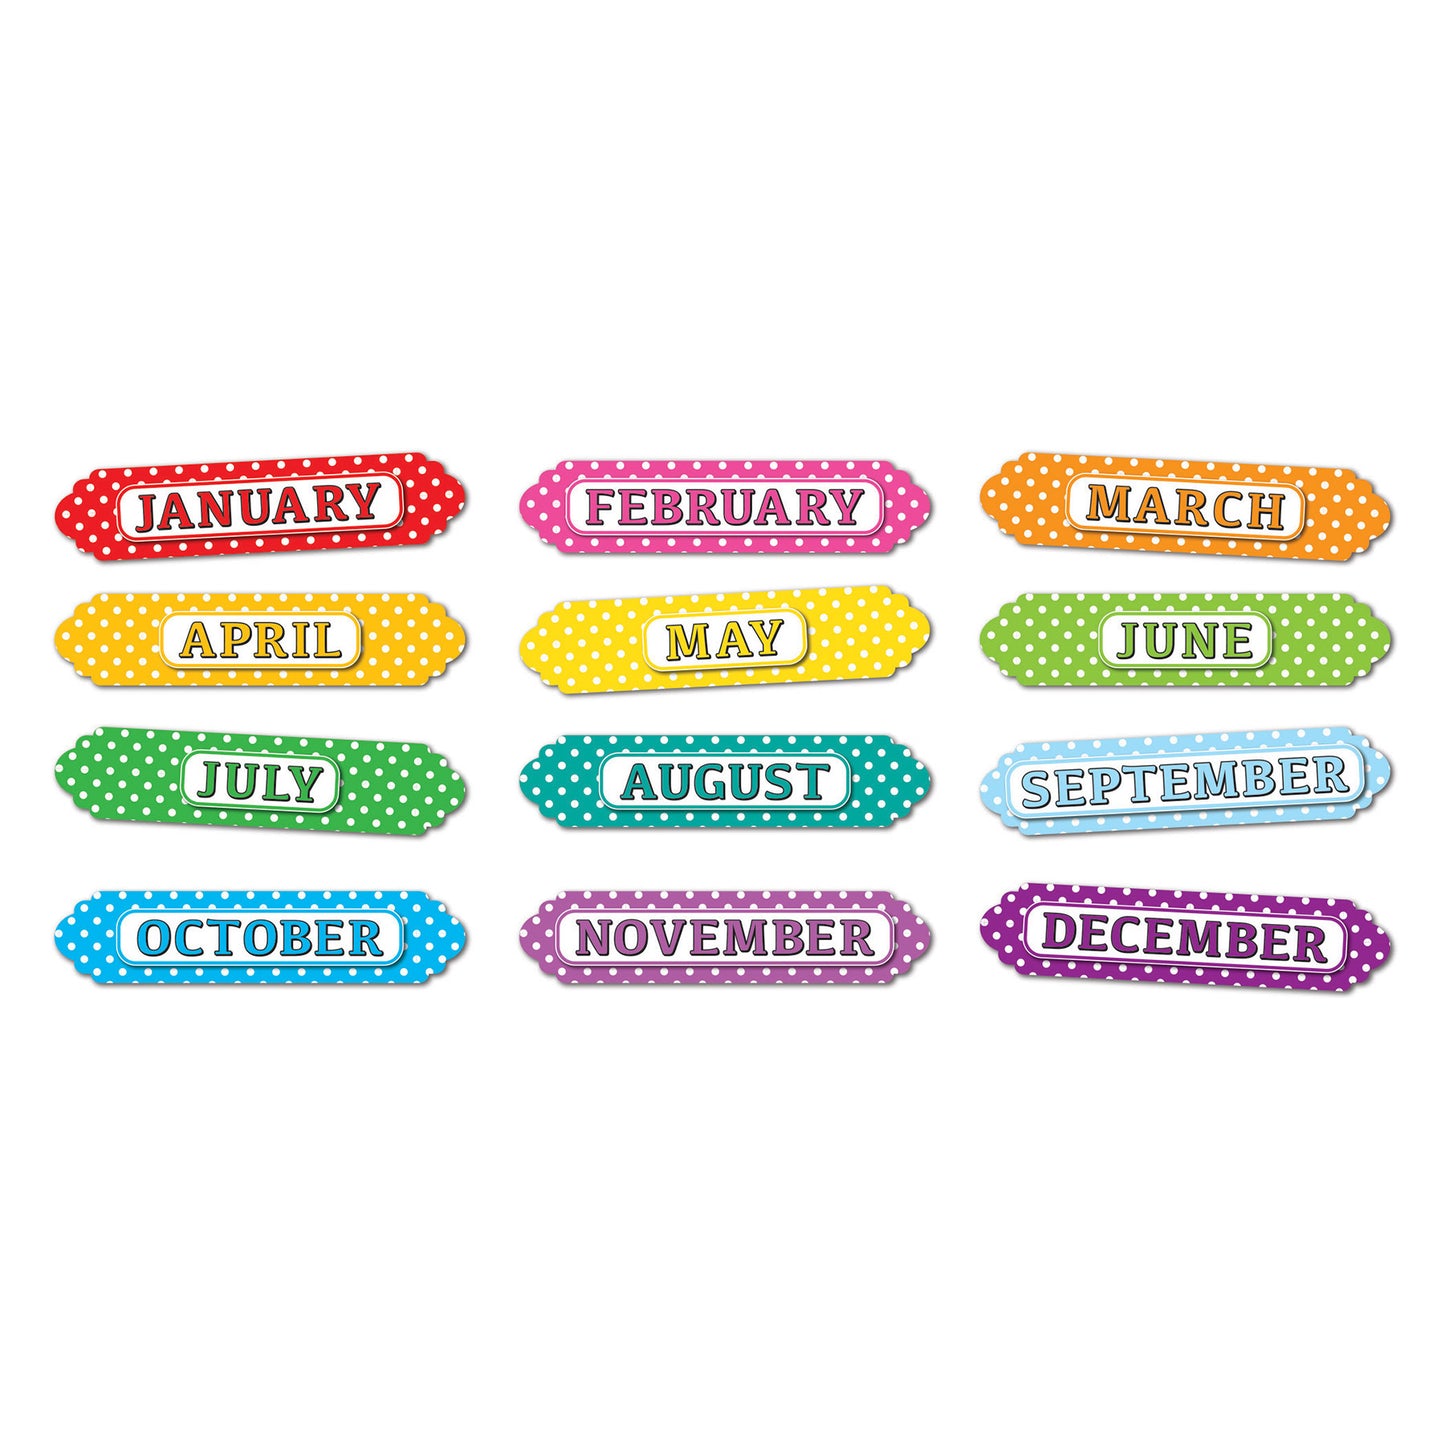 Magnetic Die-Cut Timesavers & Labels, Months of the Year, White Polka Dots On Assorted Colors, 12 Per Pack, 6 Packs